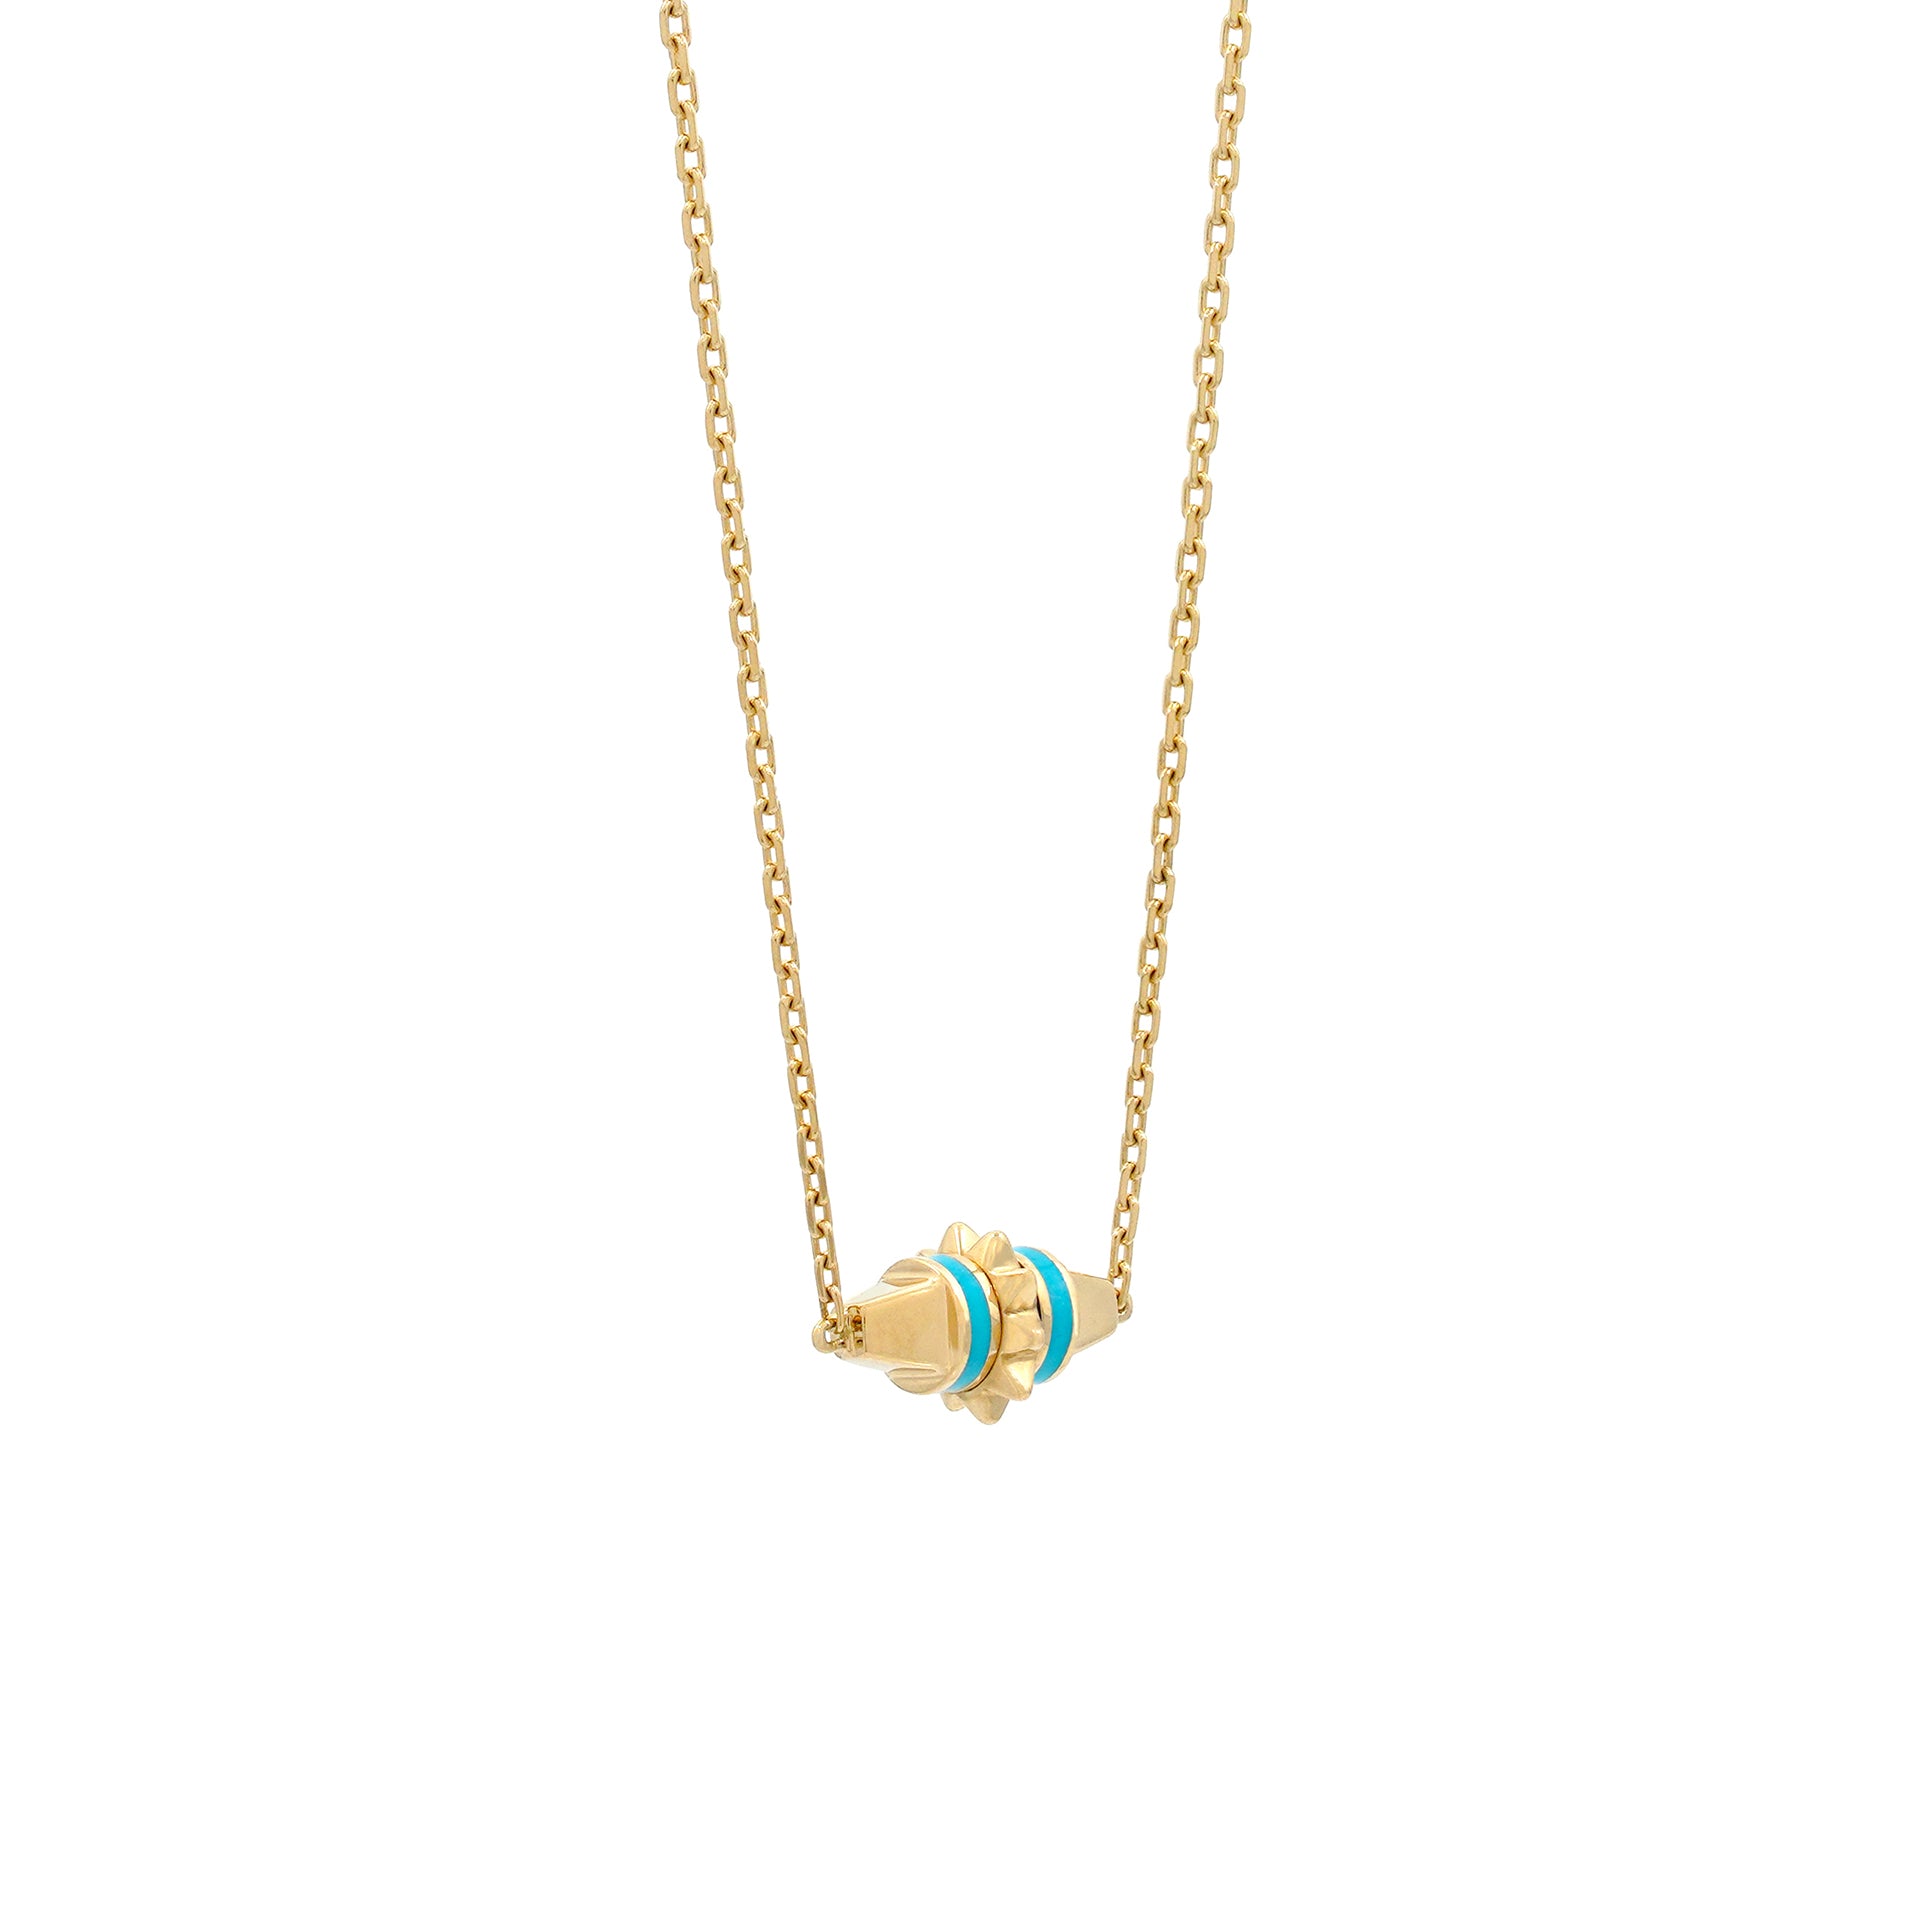 Summer Hues Necklace in Turquoise